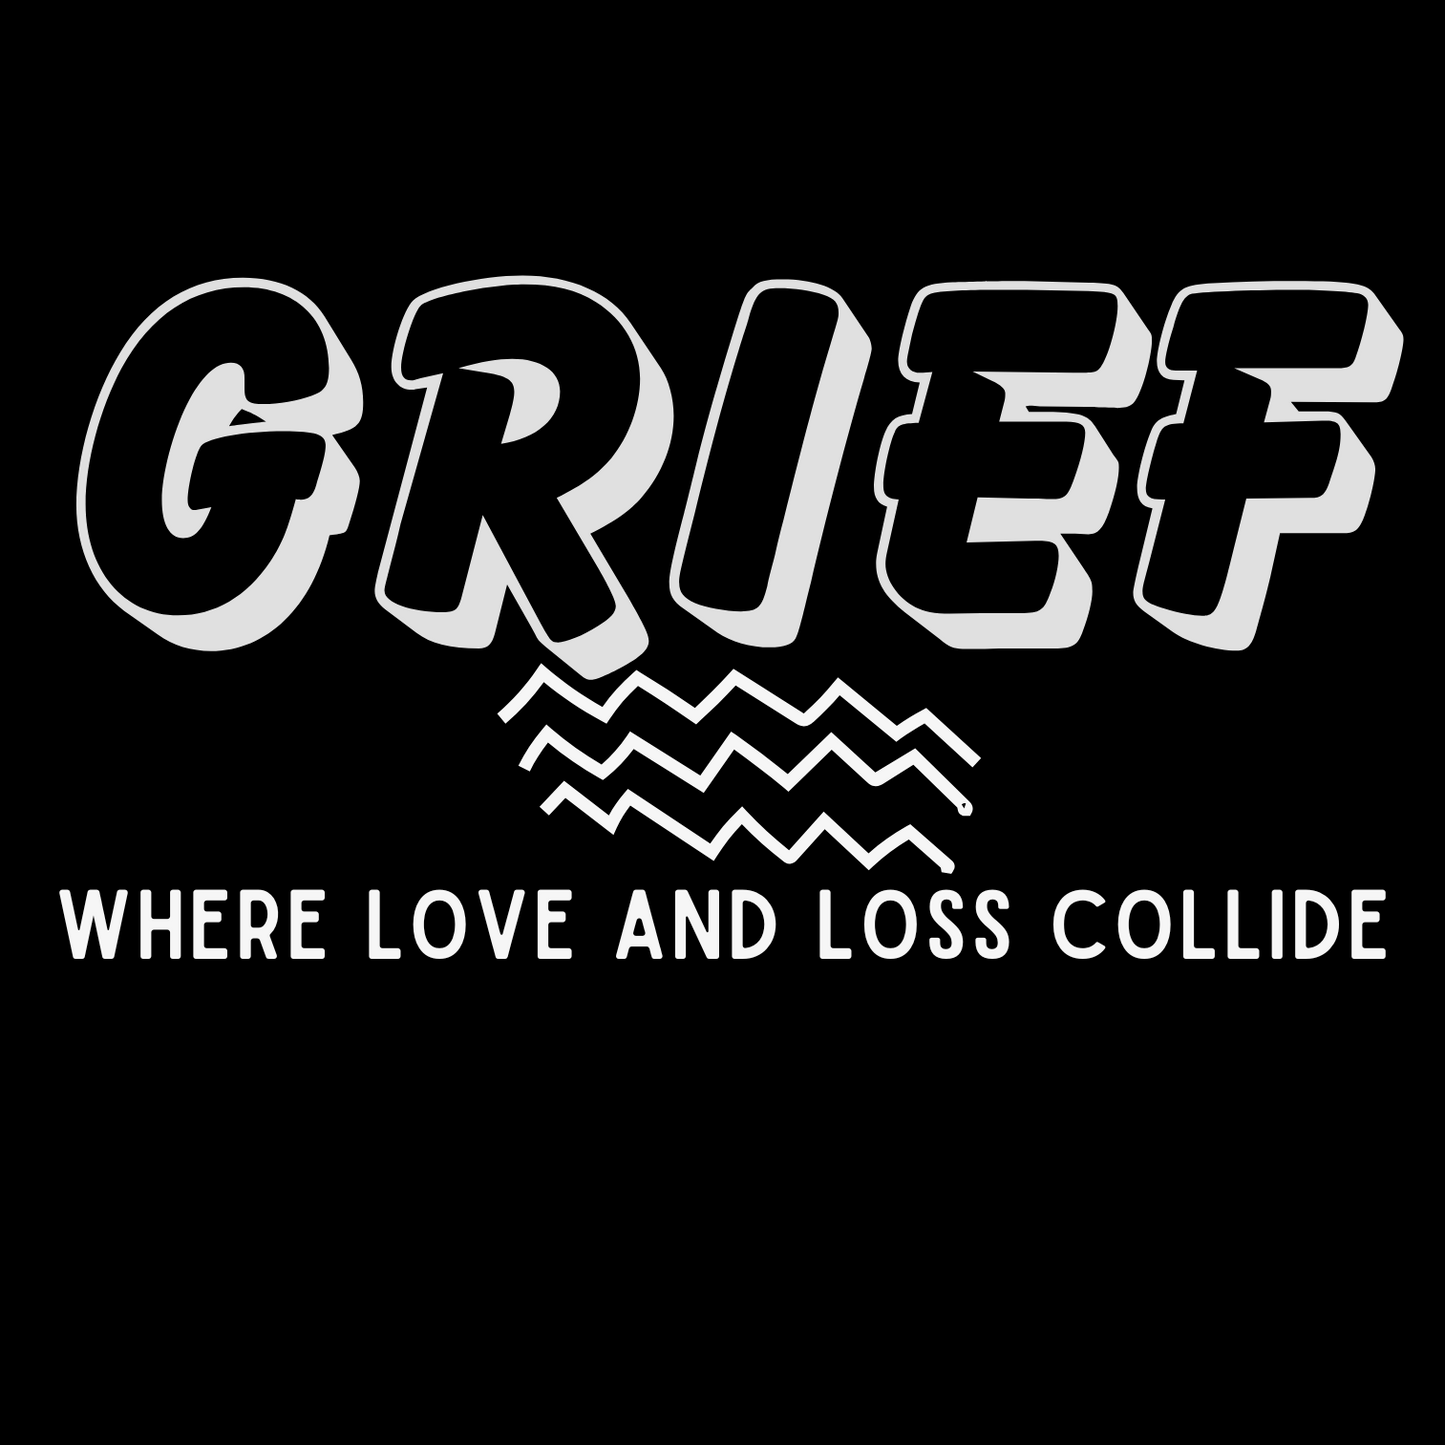 Grief Where Love and Loss Collide Comfort Colors 1717 Unisex T-shirt